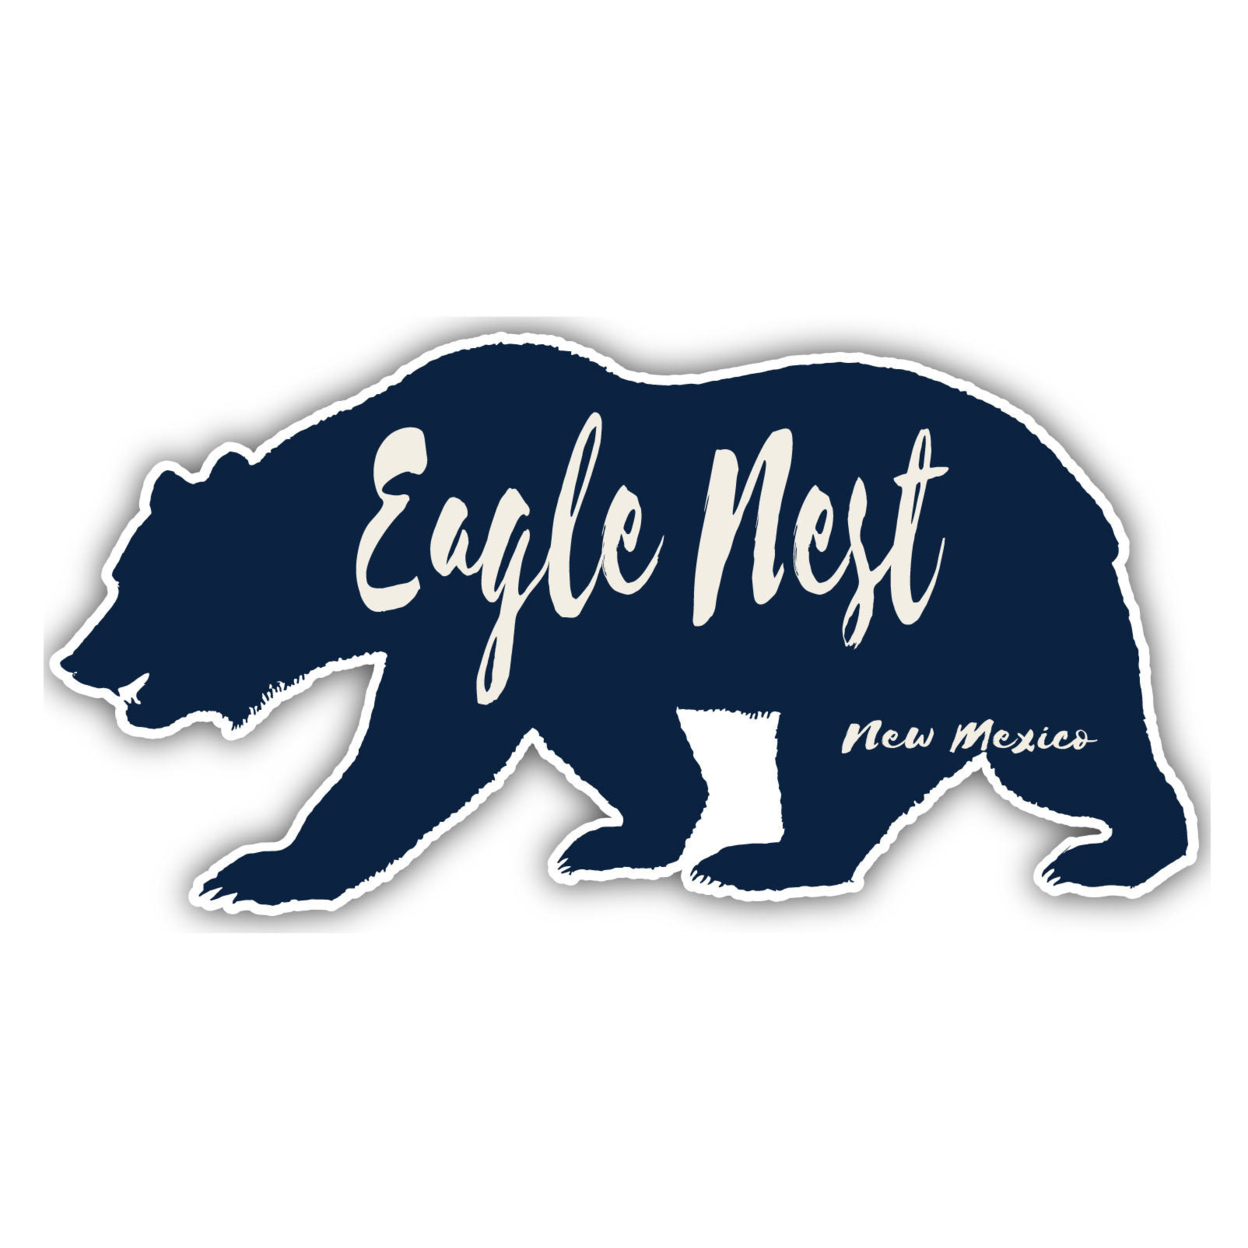 Eagle Nest New Mexico Souvenir Decorative Stickers (Choose Theme And Size) - Single Unit, 10-Inch, Great Outdoors